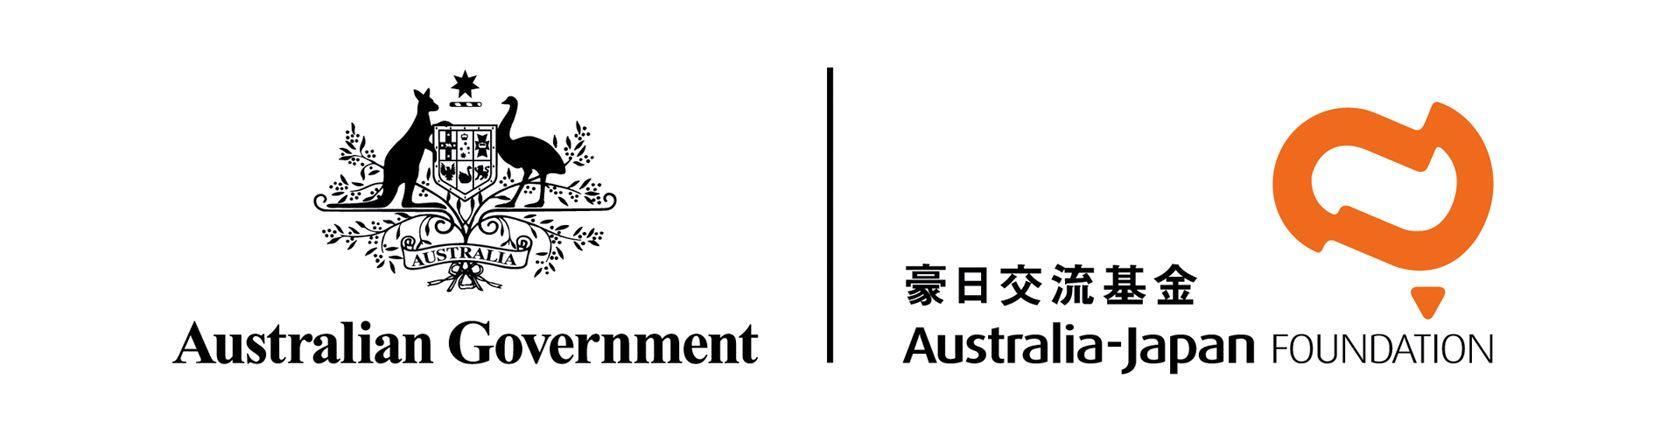 AusAID Logo - Style guide and logos - Department of Foreign Affairs and Trade